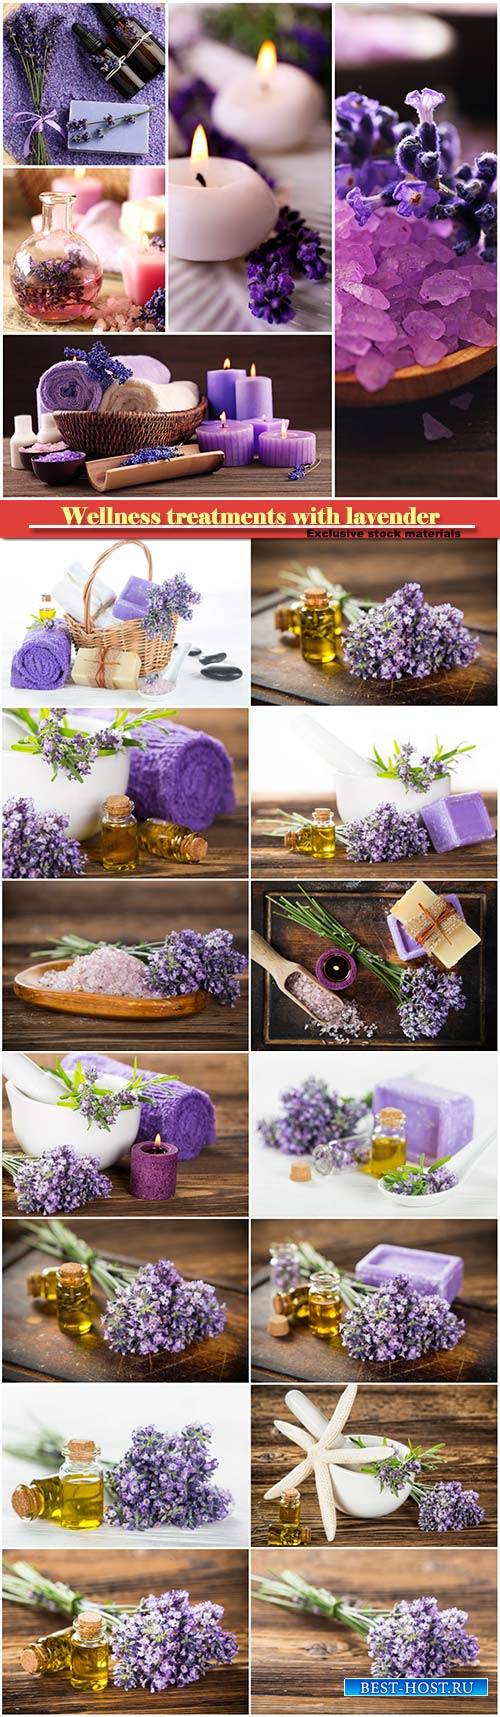 Wellness treatments with lavender flowers on wooden table, spa still-life